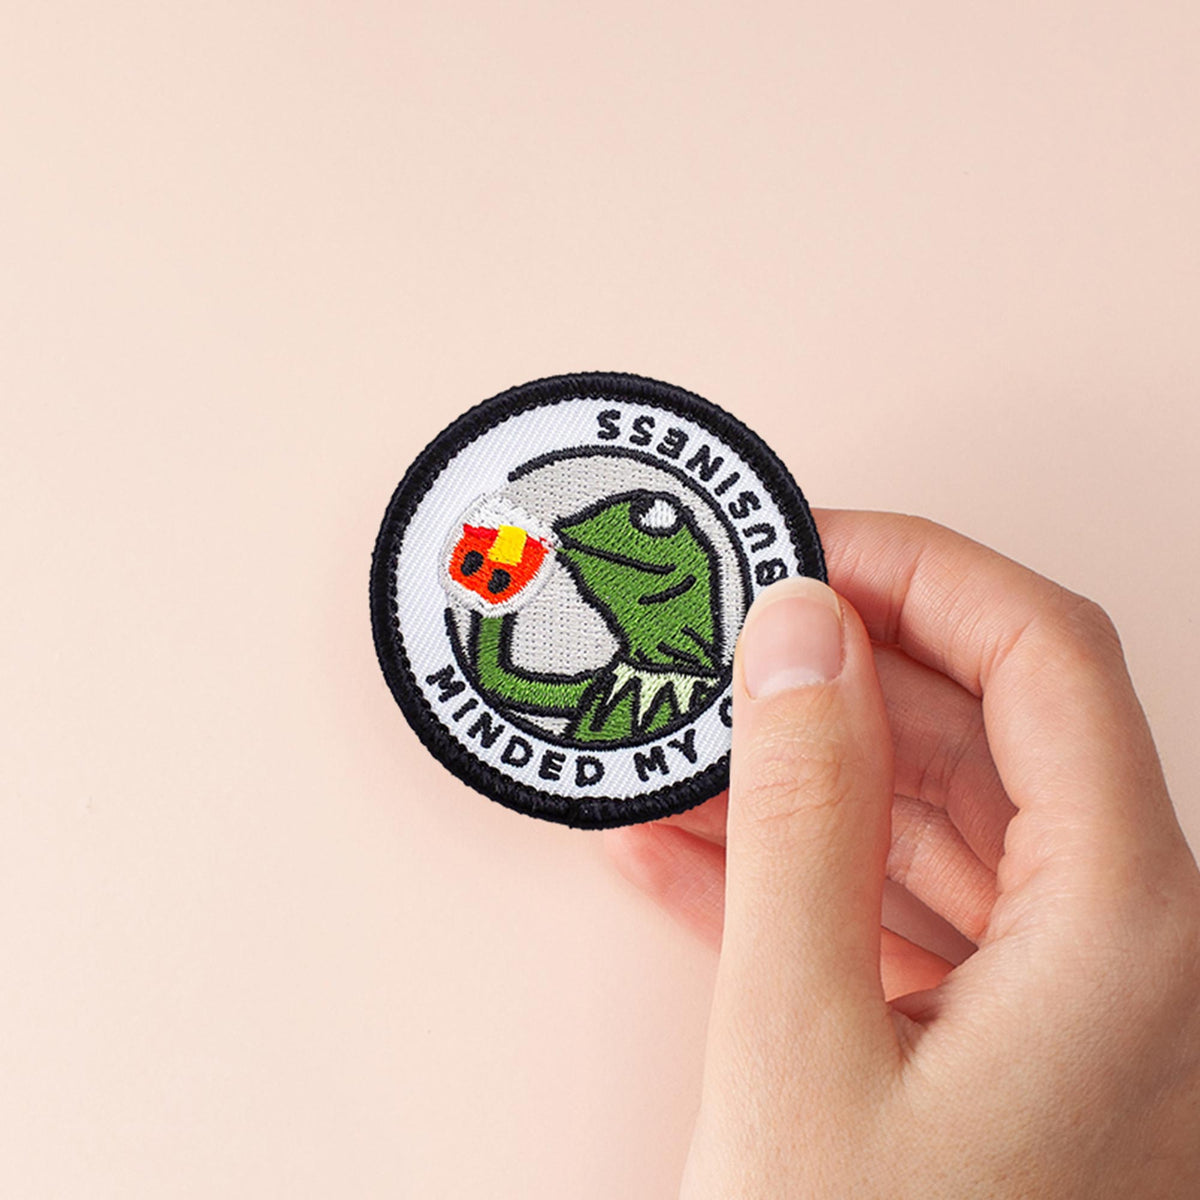 Minded My Own Business adulting merit badge patch for adults